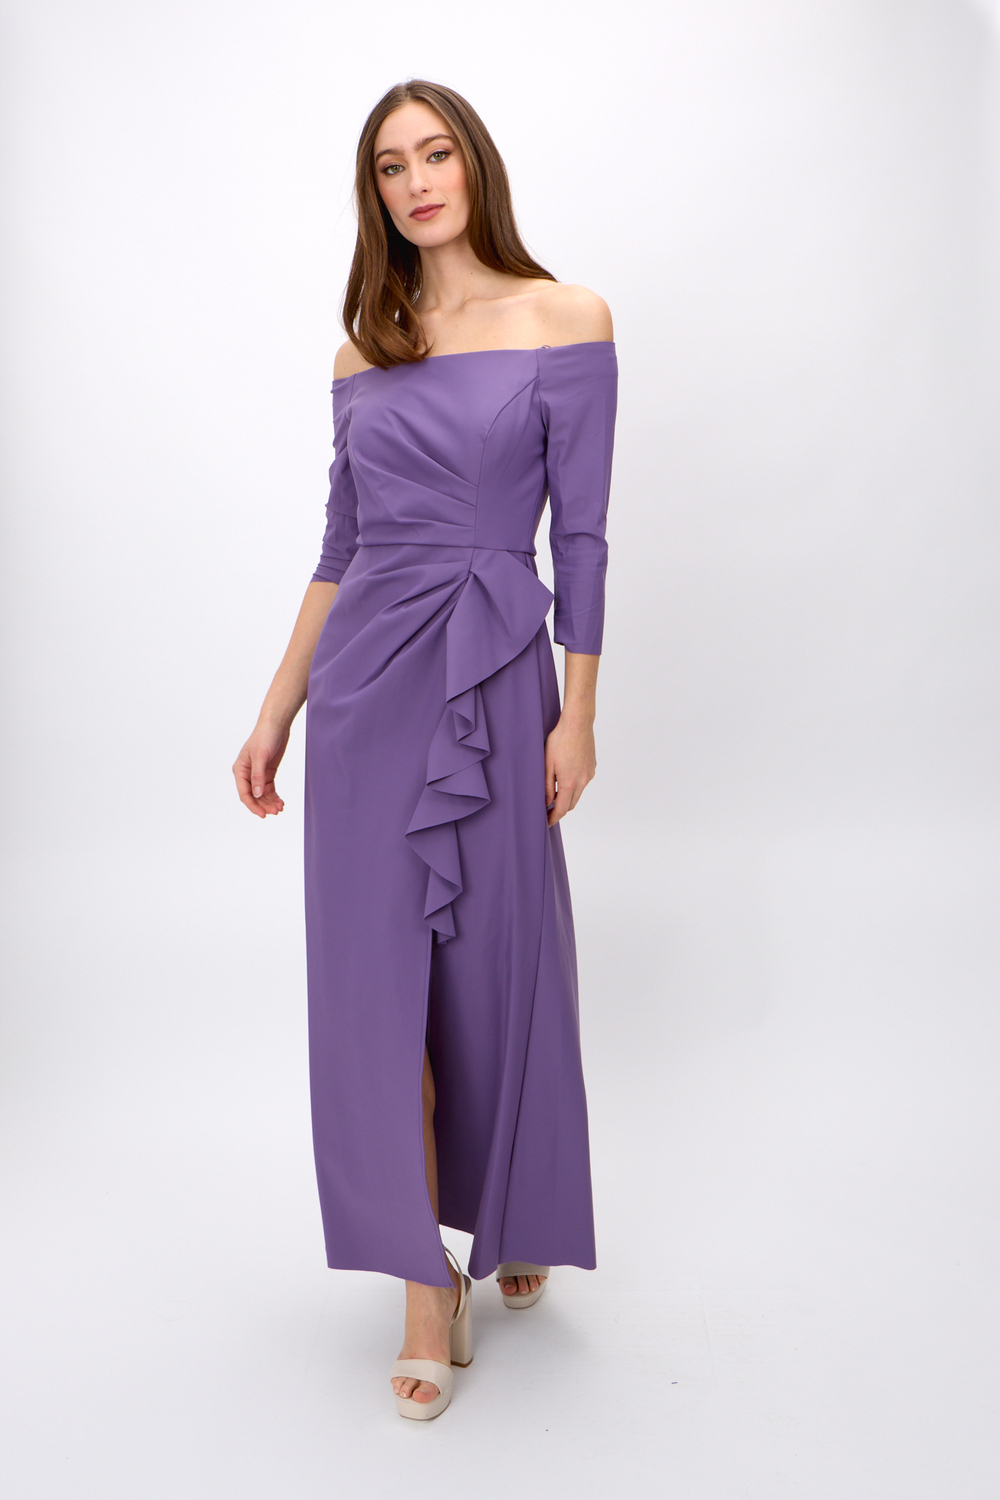 Off the Shoulder Stretch Crepe Dress style 8134325. Orchid